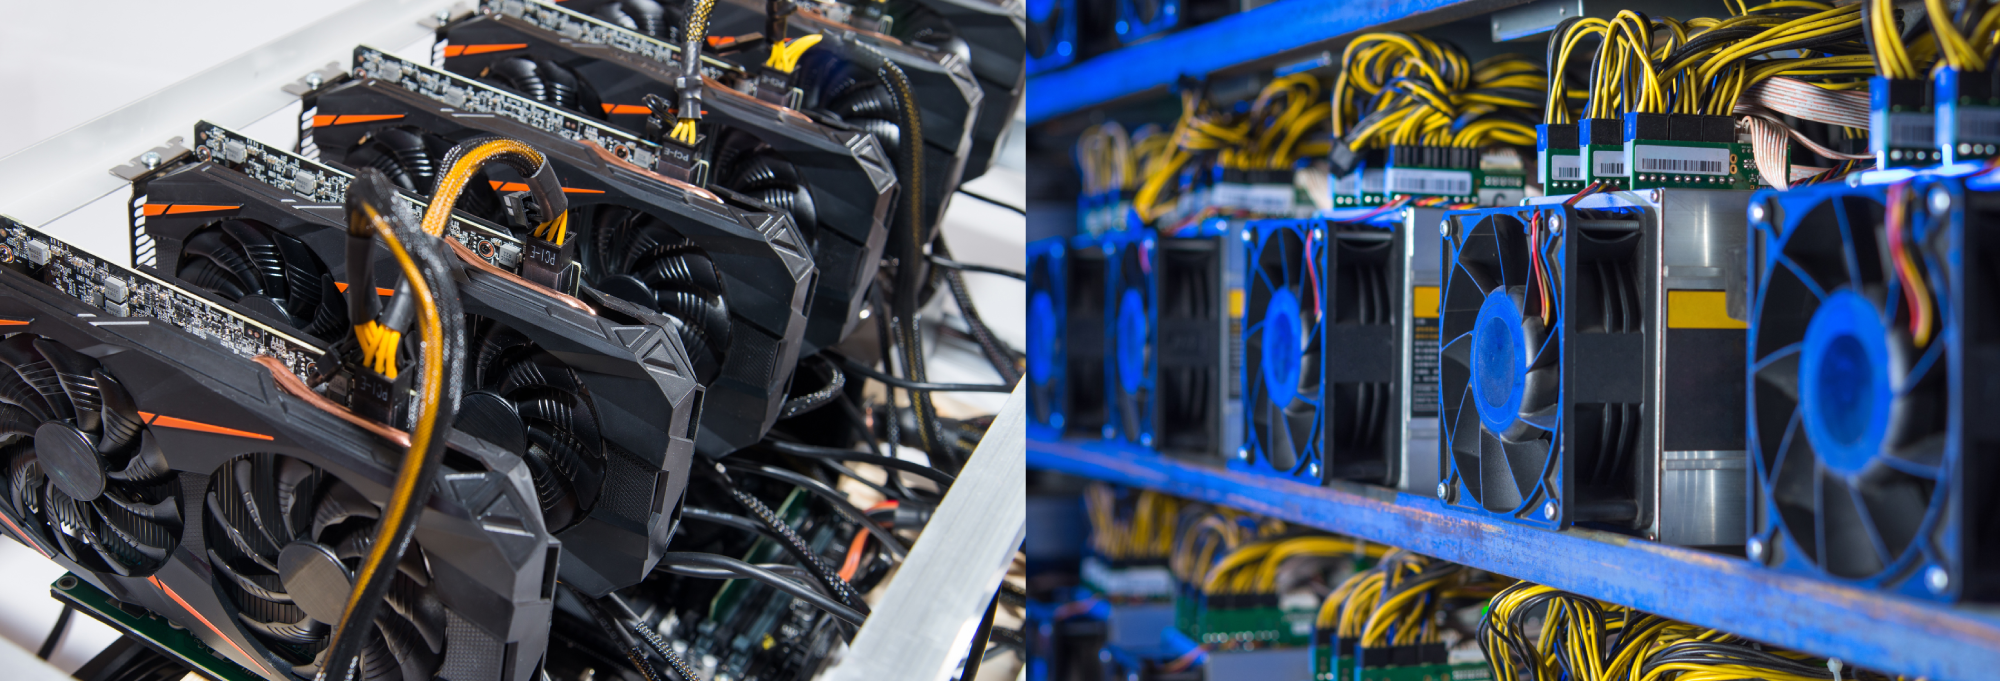 What Does ASIC Stand For? What Is the Difference Between ASIC Mining and GPU Mining? - bitcoinlog.fun